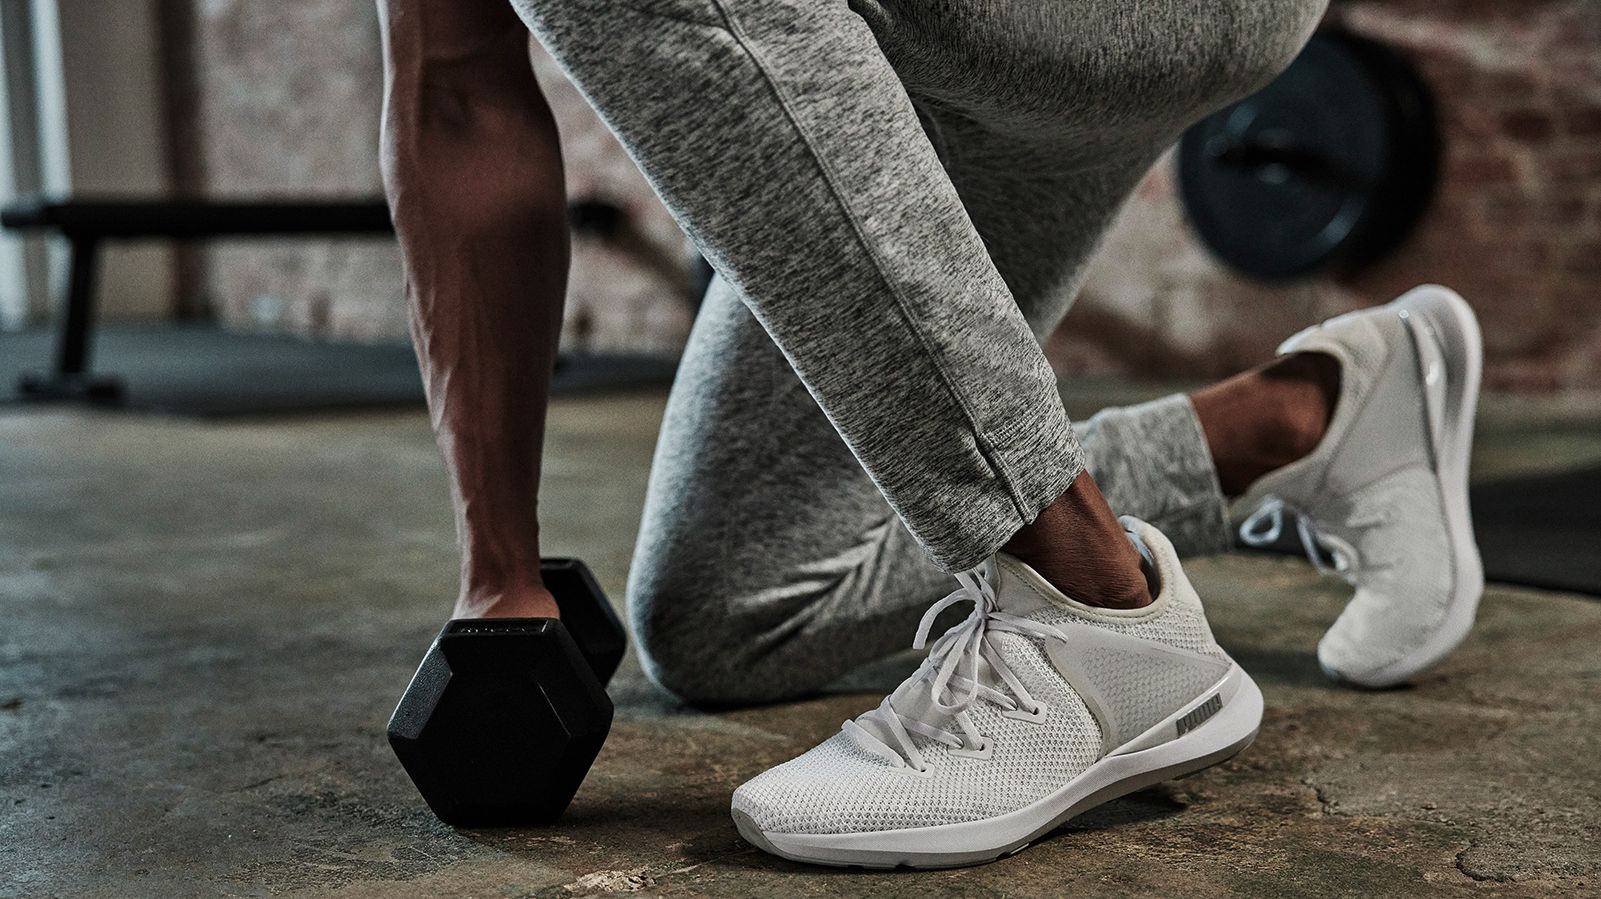 Are Puma Shoes Good for Working Out?